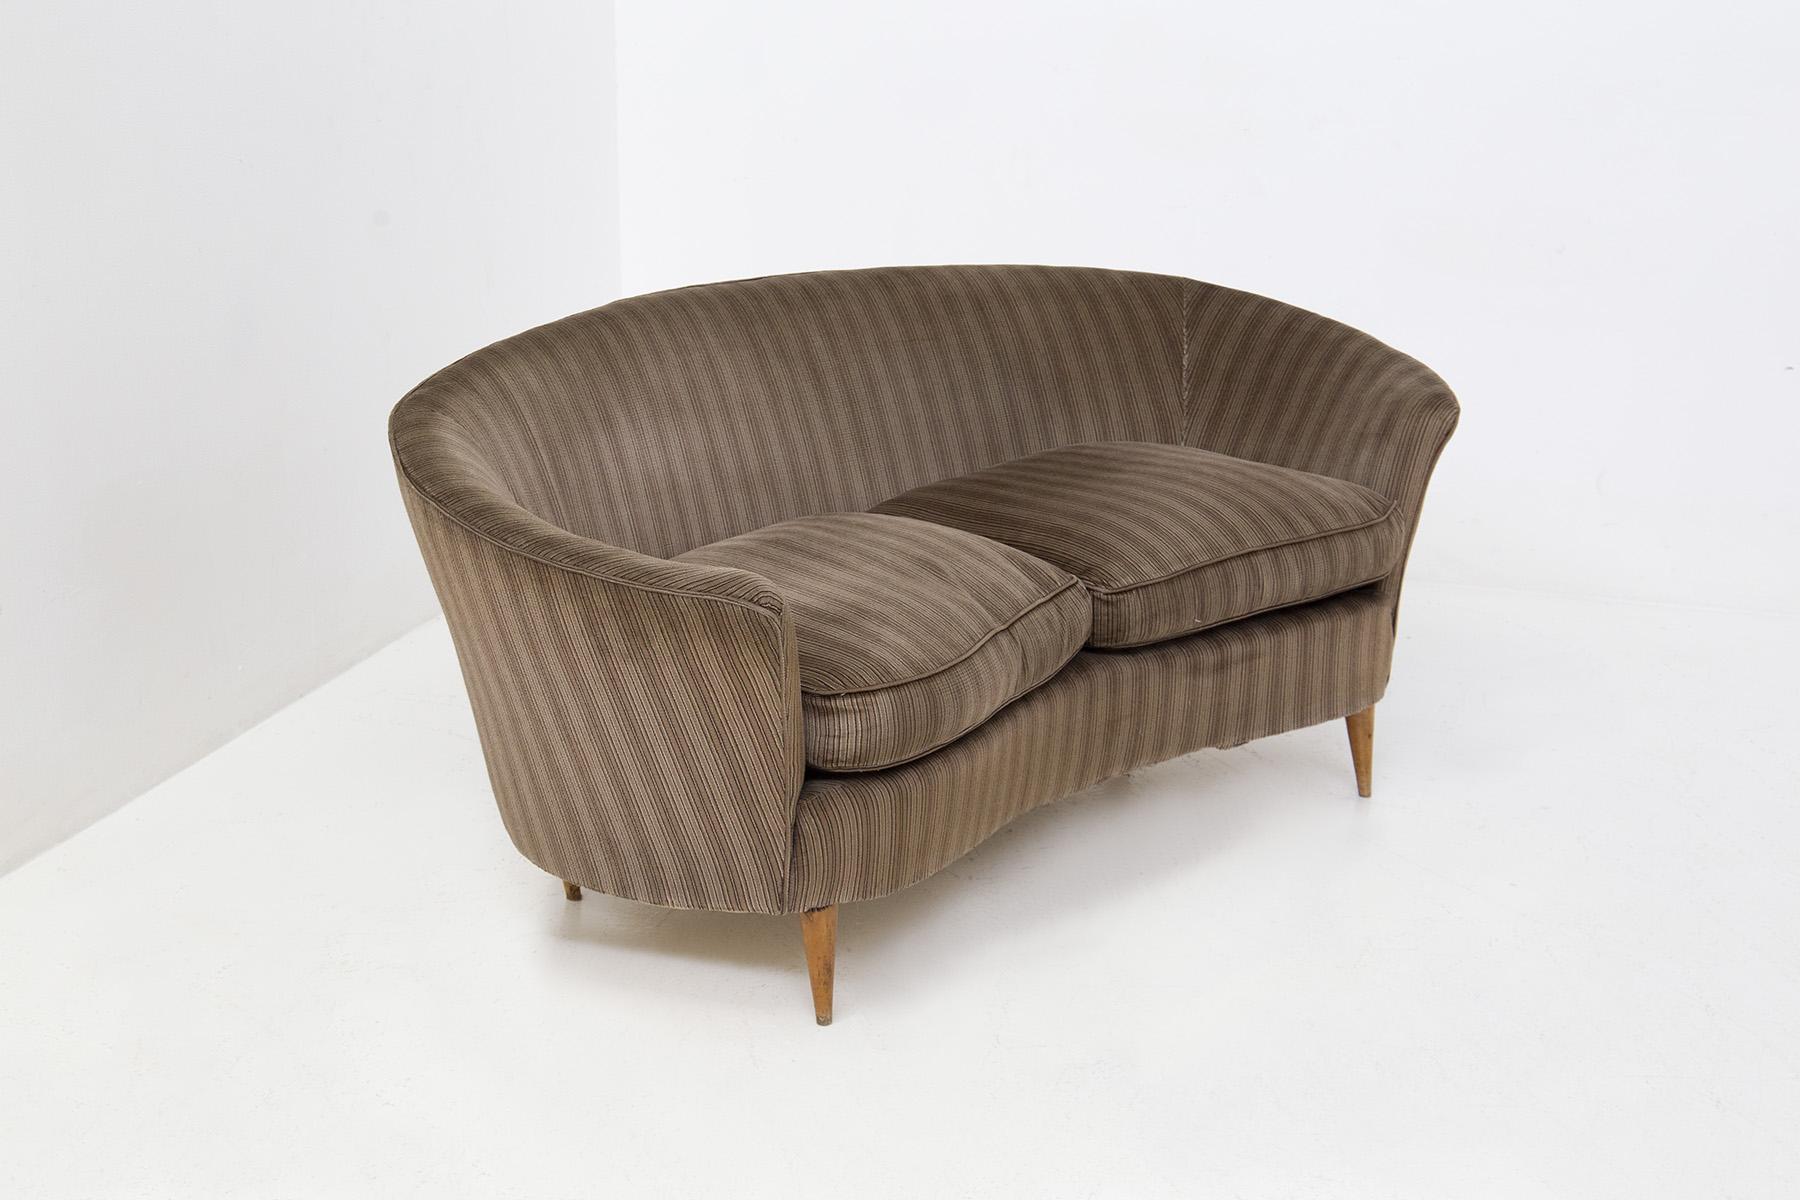 Elegant small Italian living room sofa attributed to Ico Parisi from the 1950s. The sofa is in its original condition, we also find its original fabric of the time in grey-brown striped velvet. The sofa can be classified as a loveseat because it can